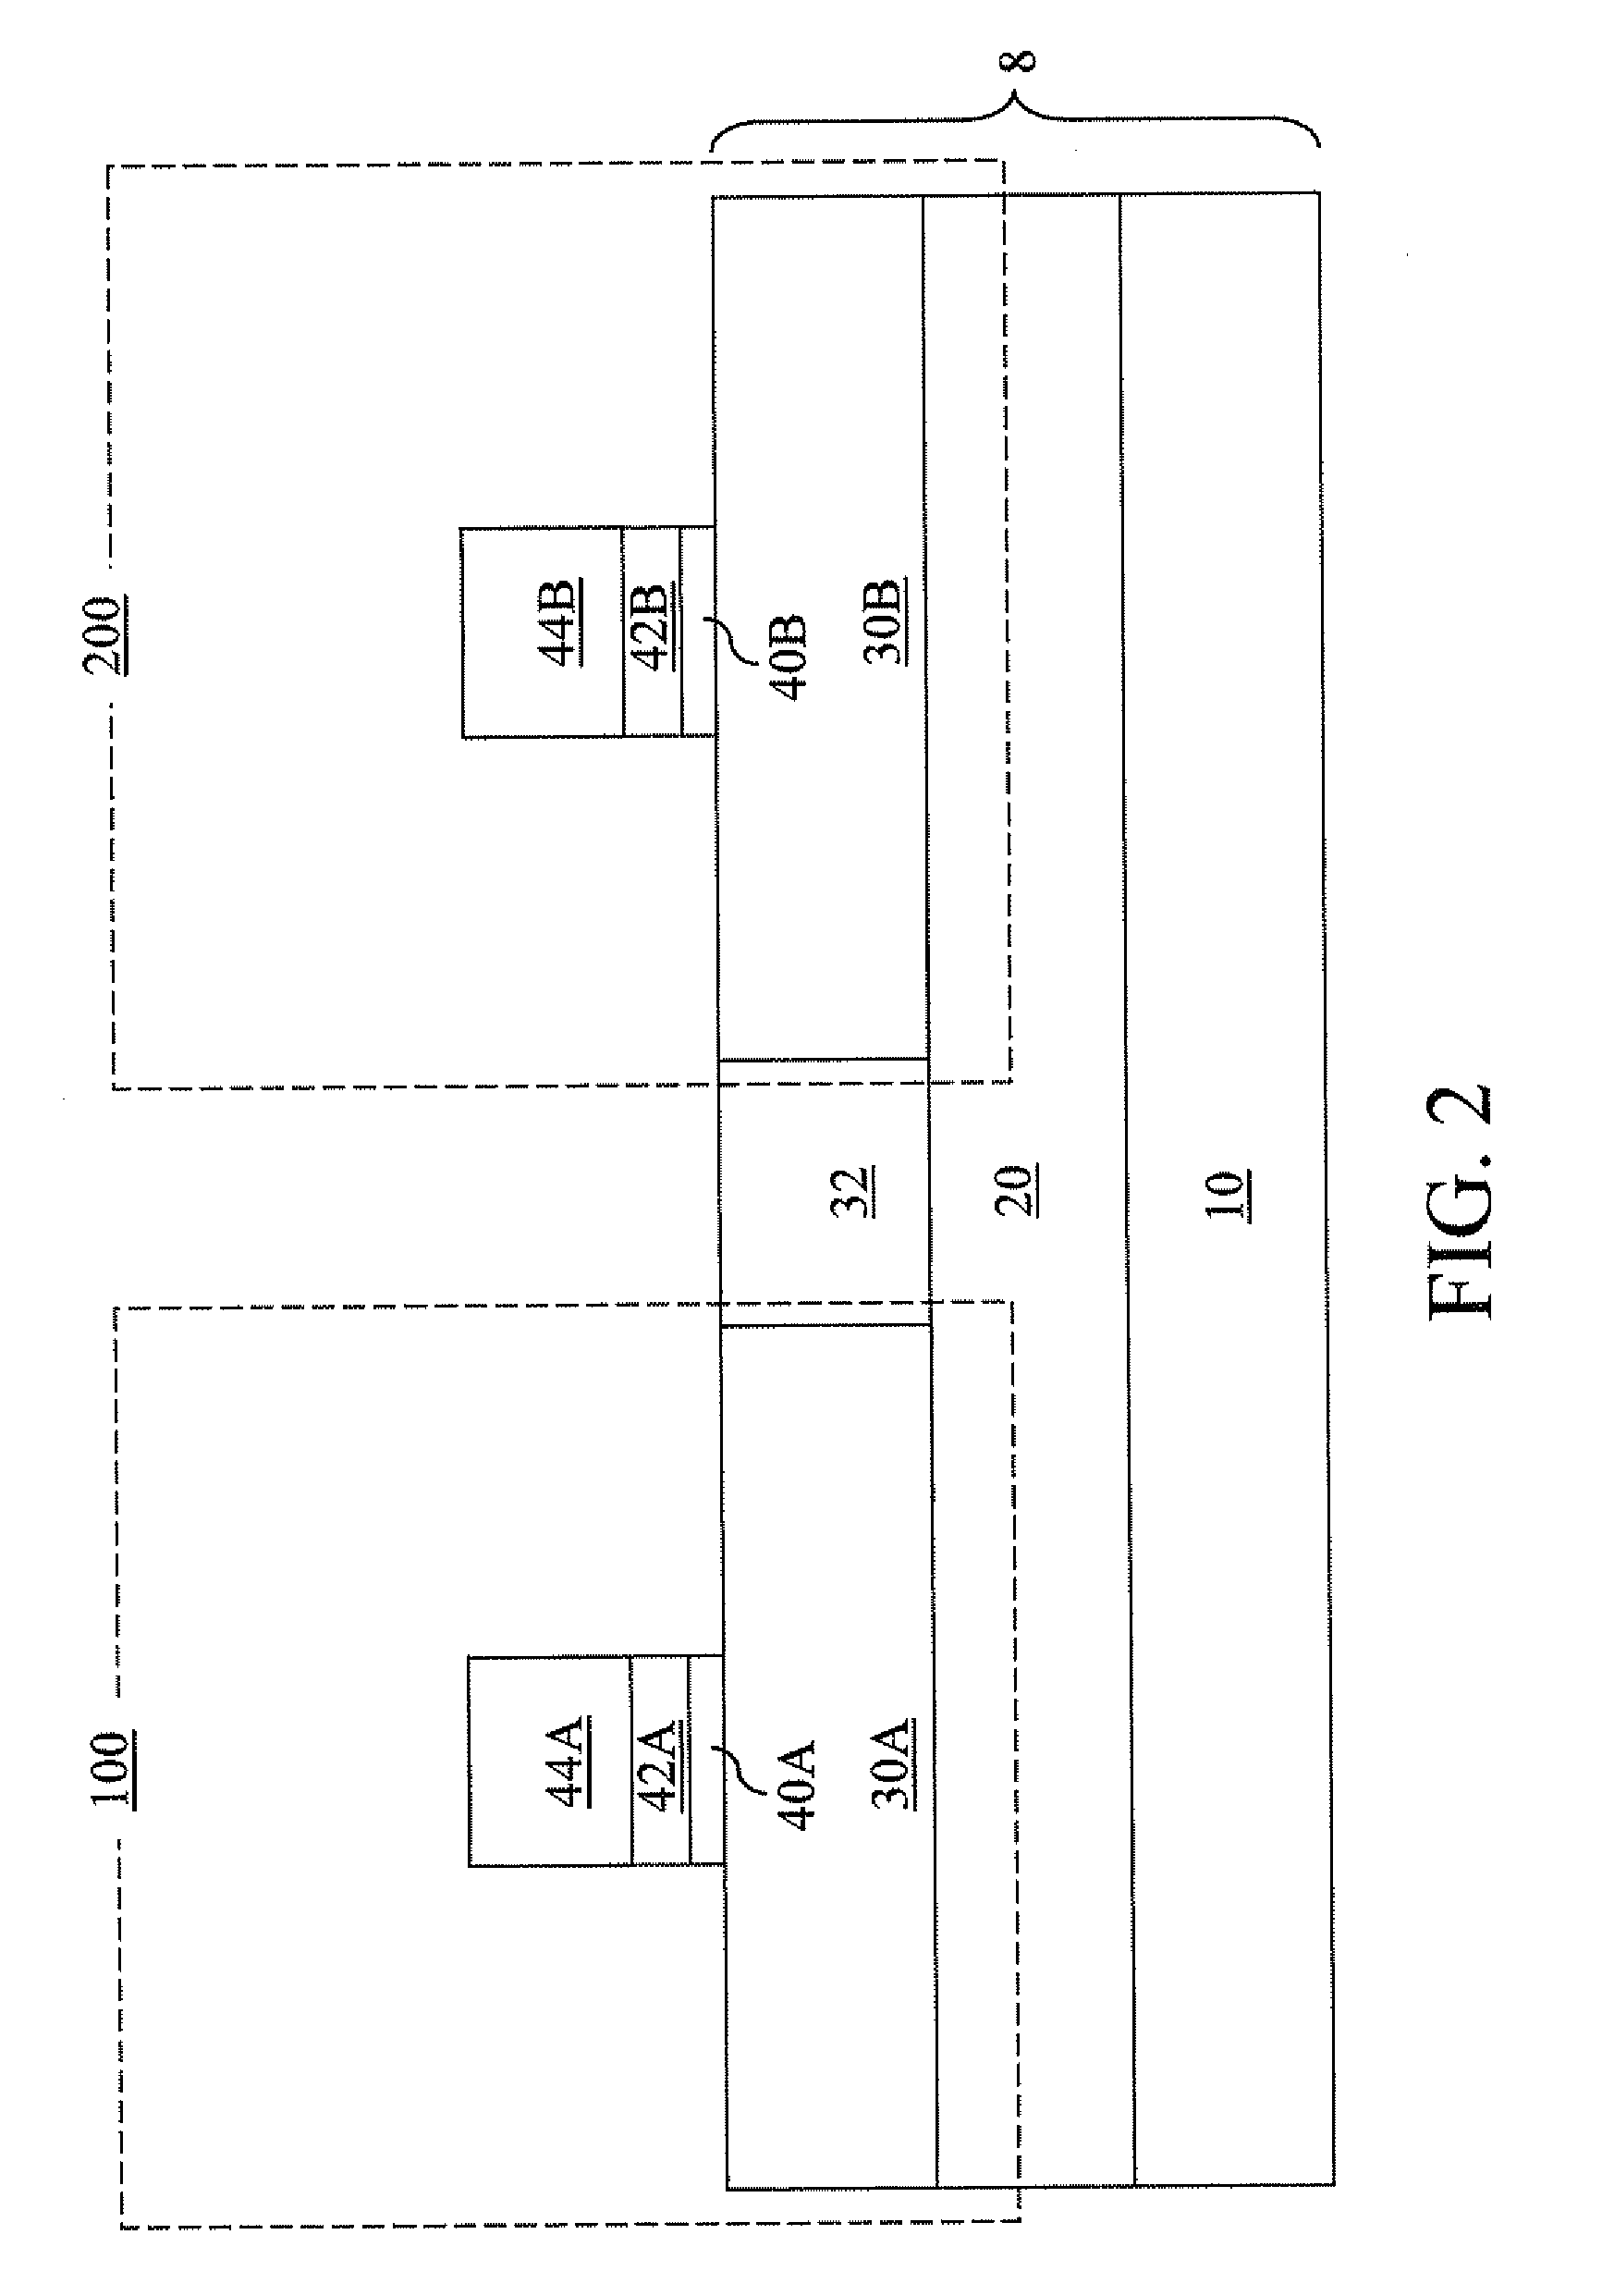 CMOS integration scheme employing a silicide electrode and a silicide-germanide alloy electrode